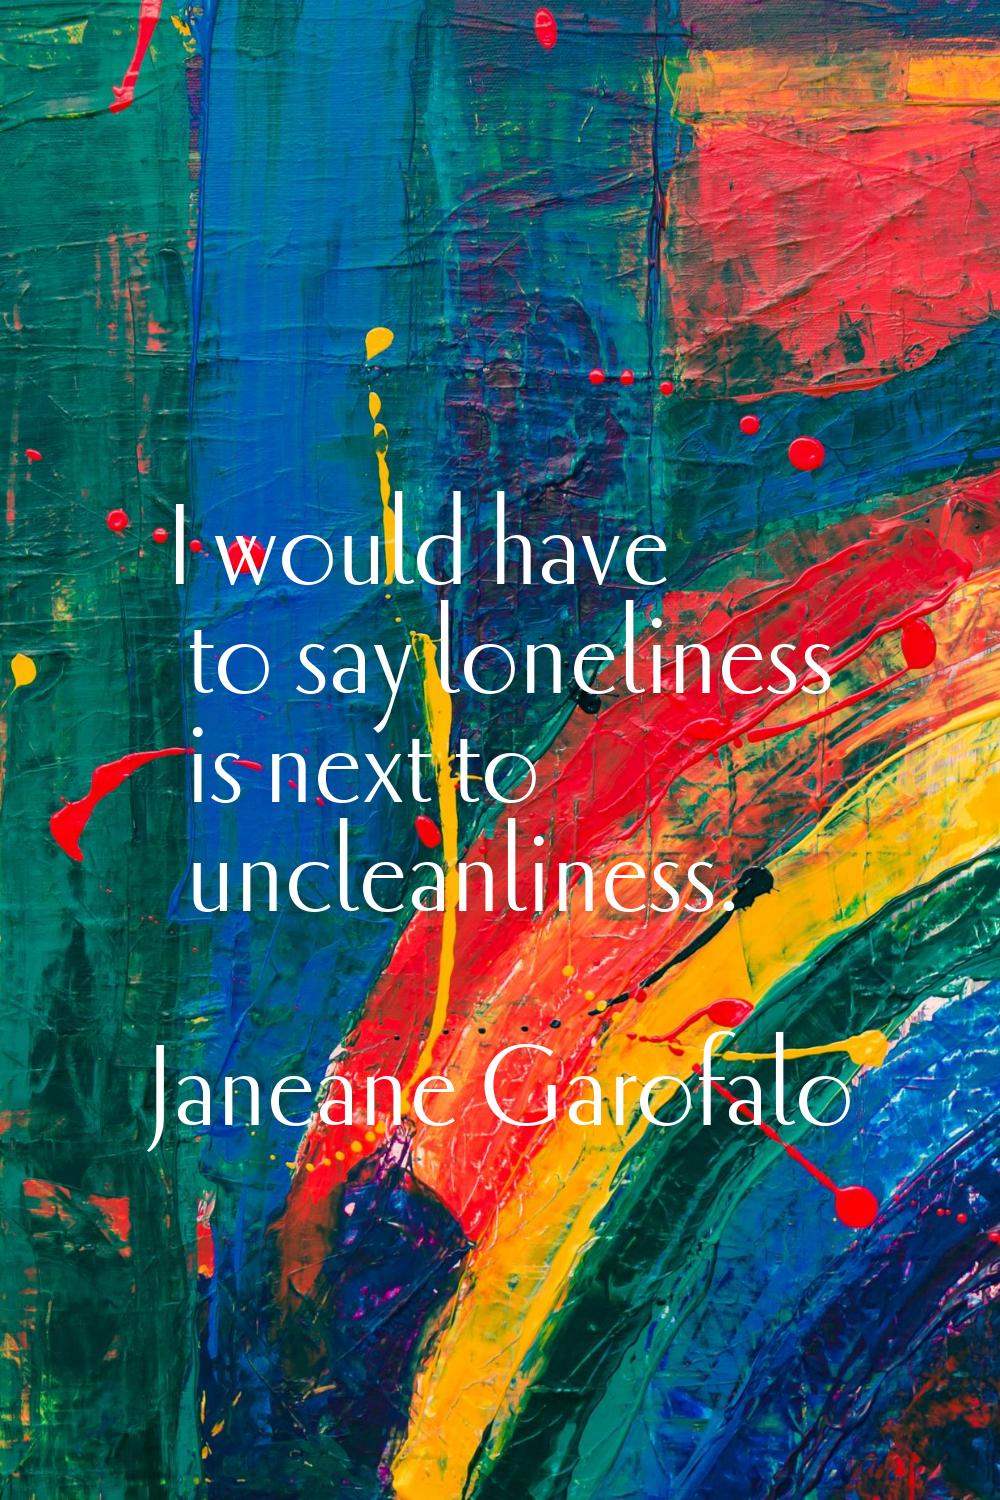 I would have to say loneliness is next to uncleanliness.